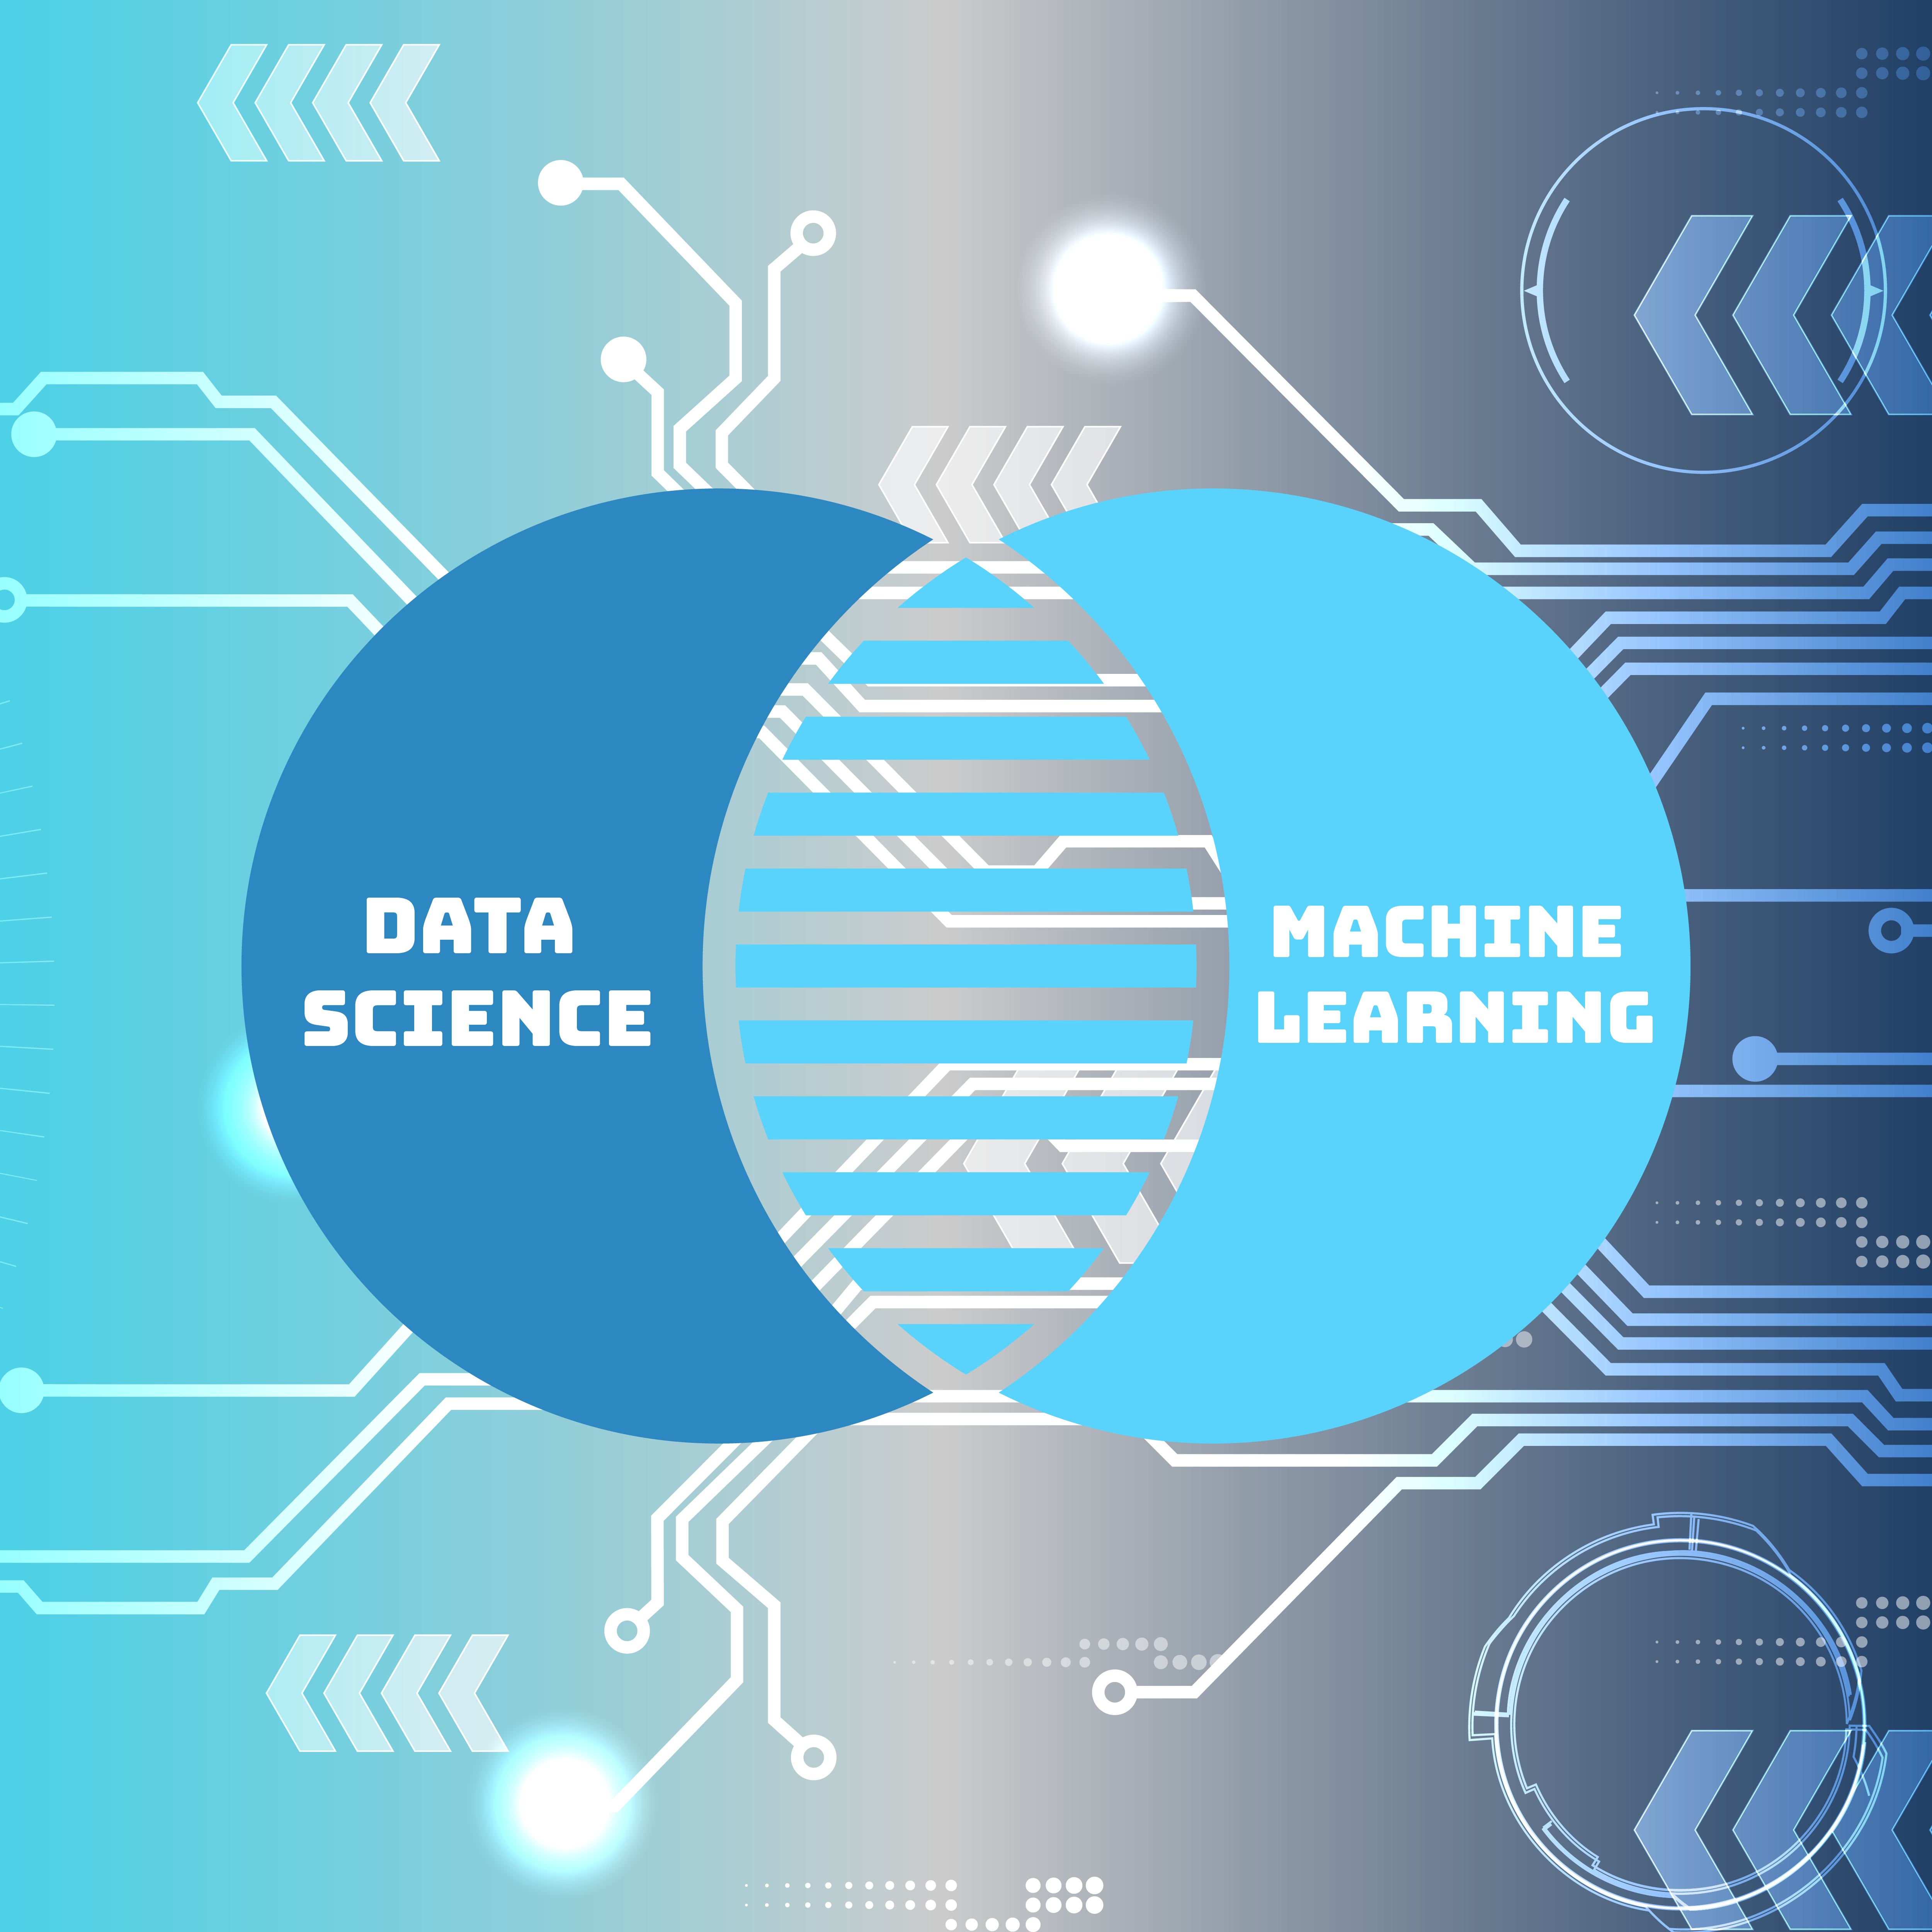 Data Science Vs. Machine Learning - The Differences and ...